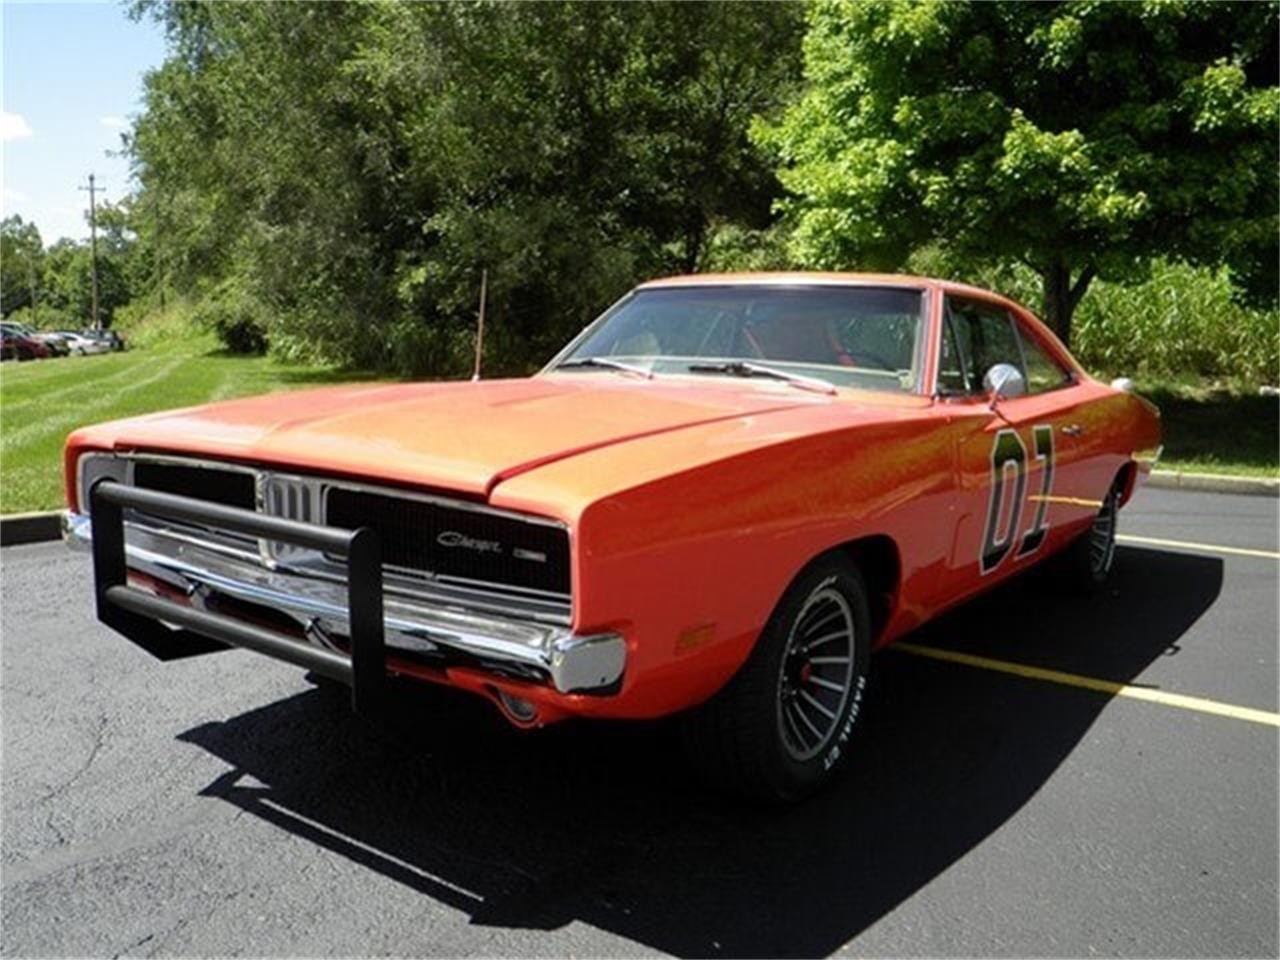 For Sale: 1969 Dodge Charger in Milford, Ohio.